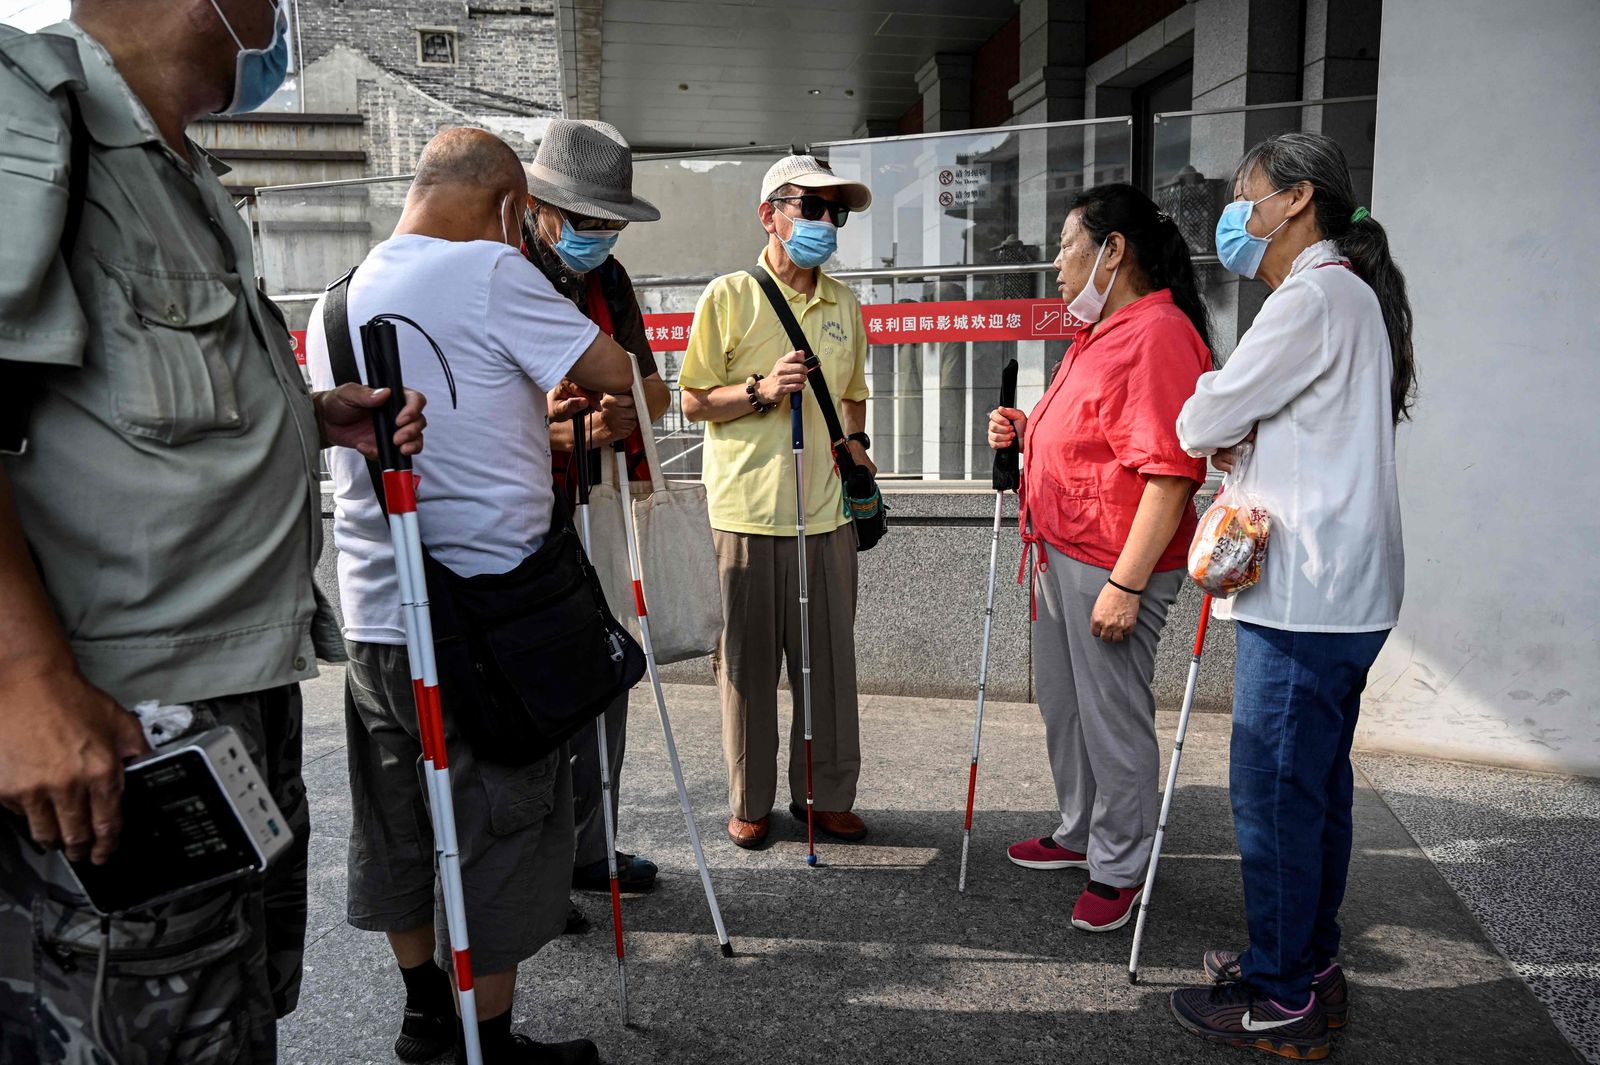 This photo taken on August 7, 2021 shows visually impaired people gathering at the entrance of a cinema in Beijing. - Dozens of blind moviegoers come to the Saturday screenings organised by Xin Mu Theater, a small group of volunteers who were the first to introduce films to blind audiences in China. (Photo by Jade GAO / AFP) / To go with AFP story China-social-disabled-film, FEATURE by Poornima WEERASEKARA and Danni ZHU - AFP